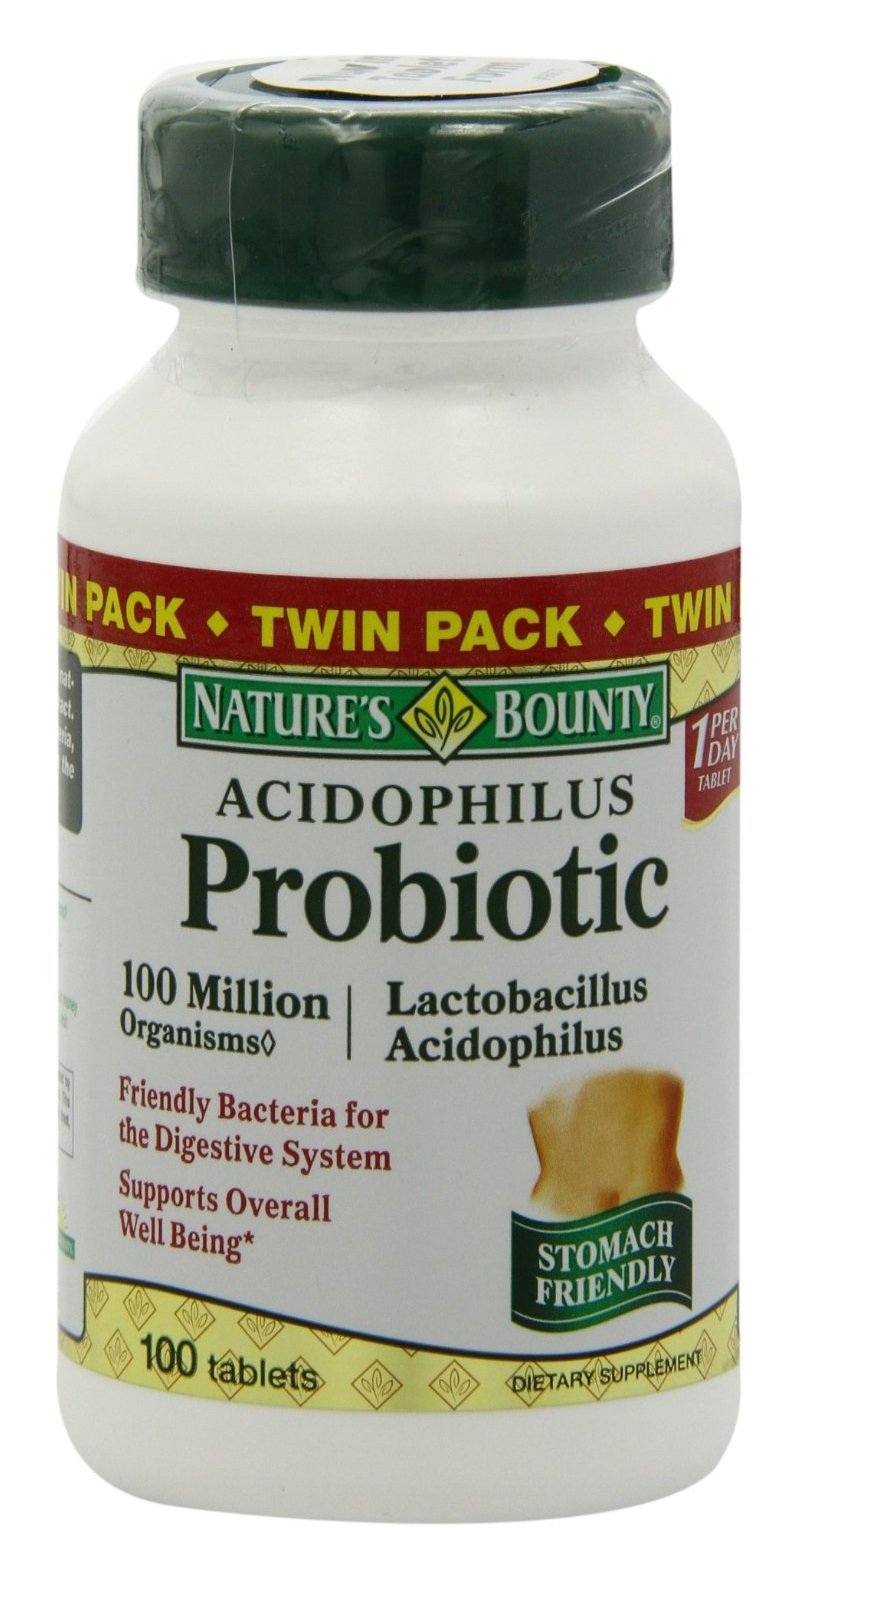 Acidophilus Probiotic by Nature's Bounty, Twin Pack, 200 Tablets Expires-10/22 (6961576902839)